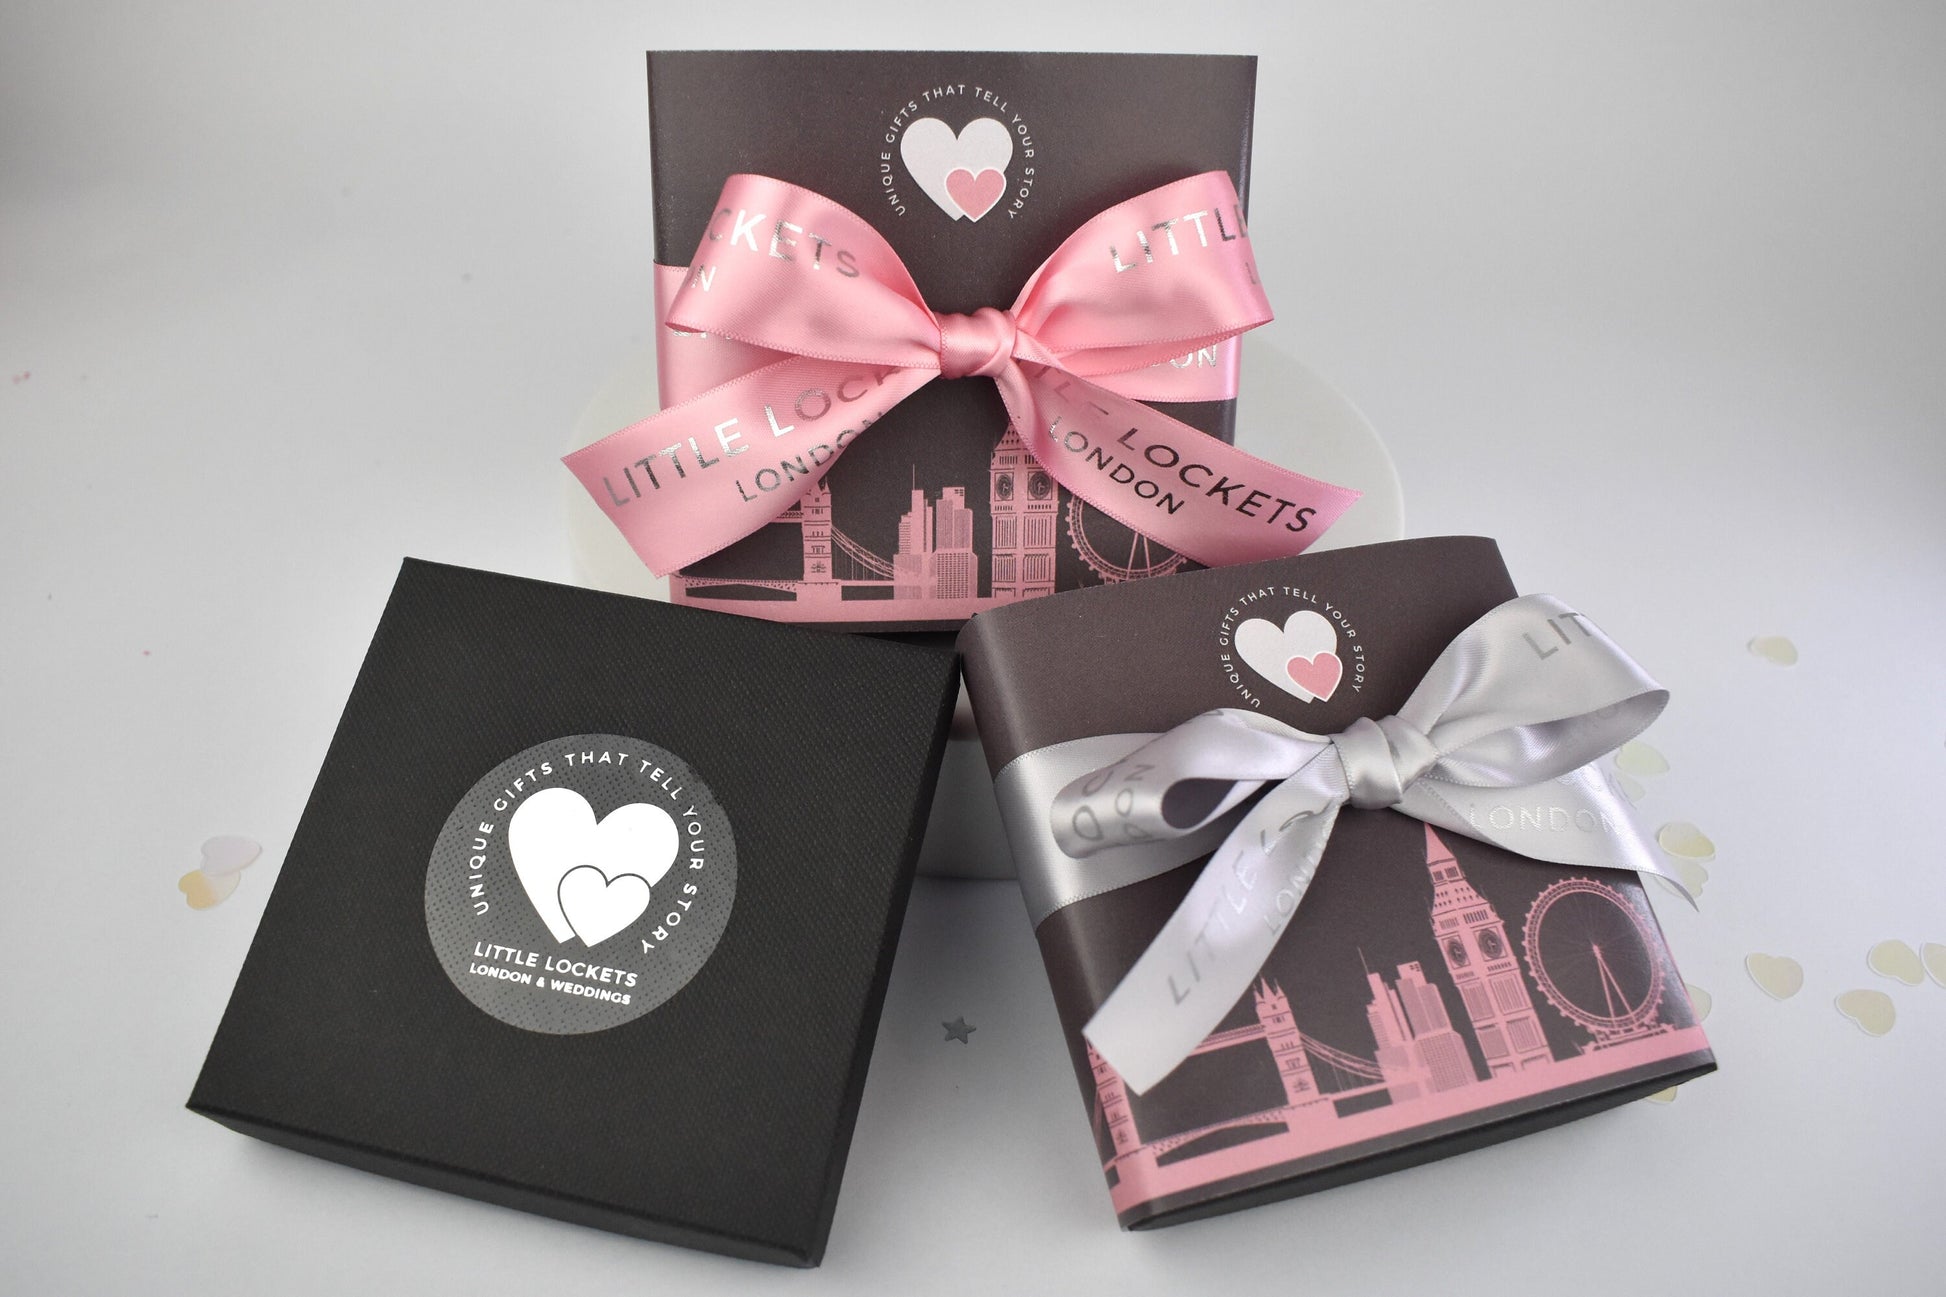 Your gift will arrive in a branded gift box or choose to add a London skyline wrap with a pink or grey ribbon tie